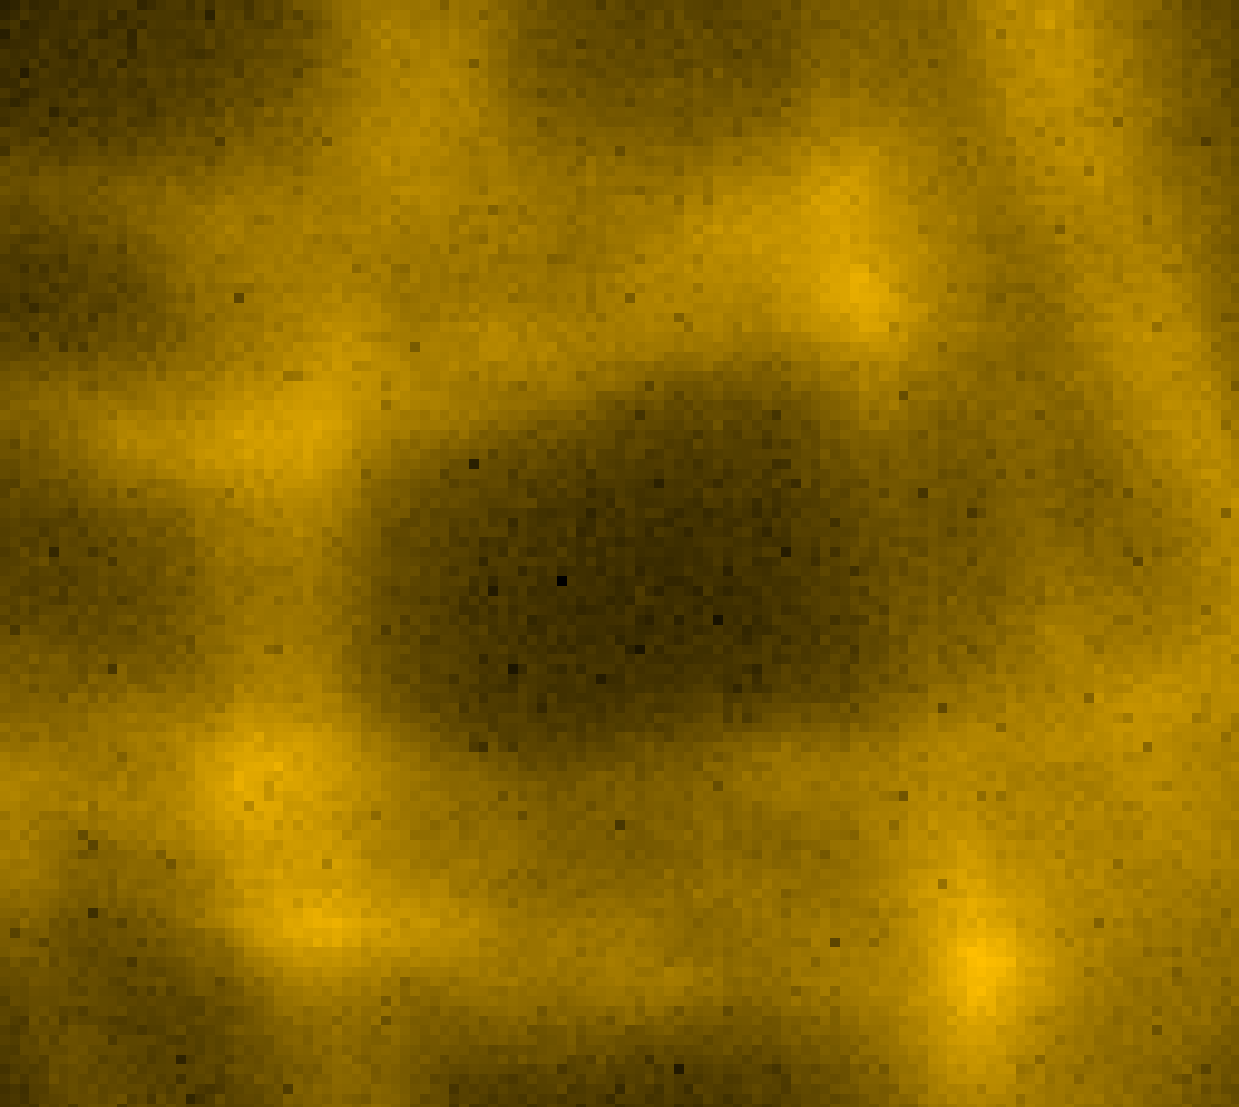 Example of a 2D image that is strongly affected by cold pixels. The cold pixels are clearly visible as they appear much darker than the surrounding pixels.